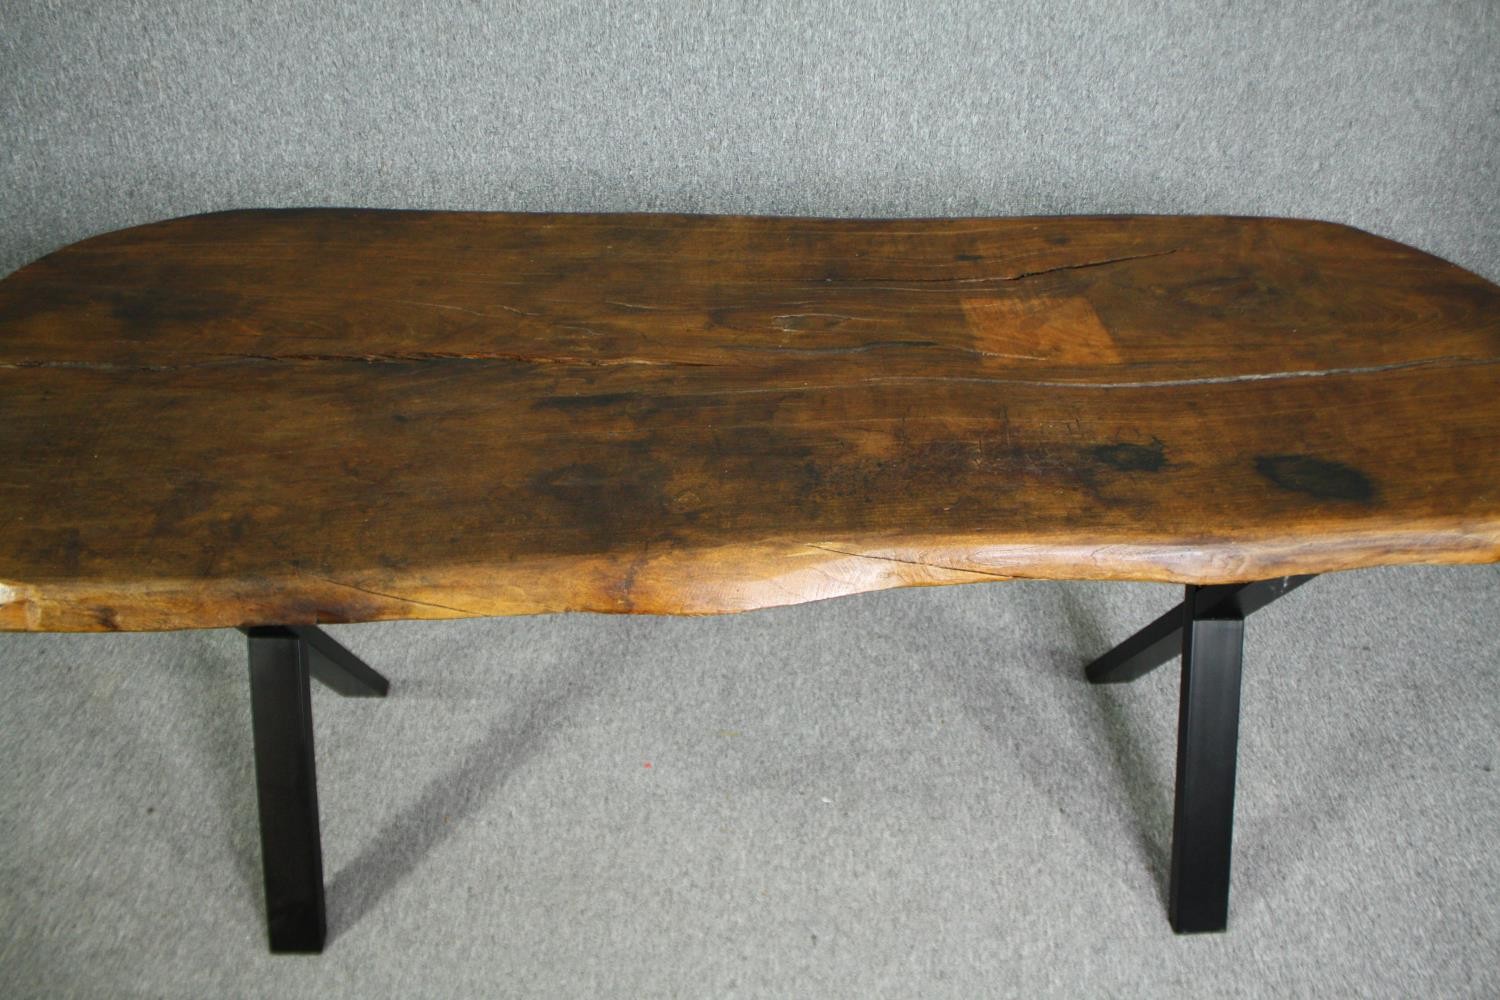 Dining table, rough hewn hardwood top on metal X trestle base. H.76 W.184 D.78cm. - Image 7 of 8